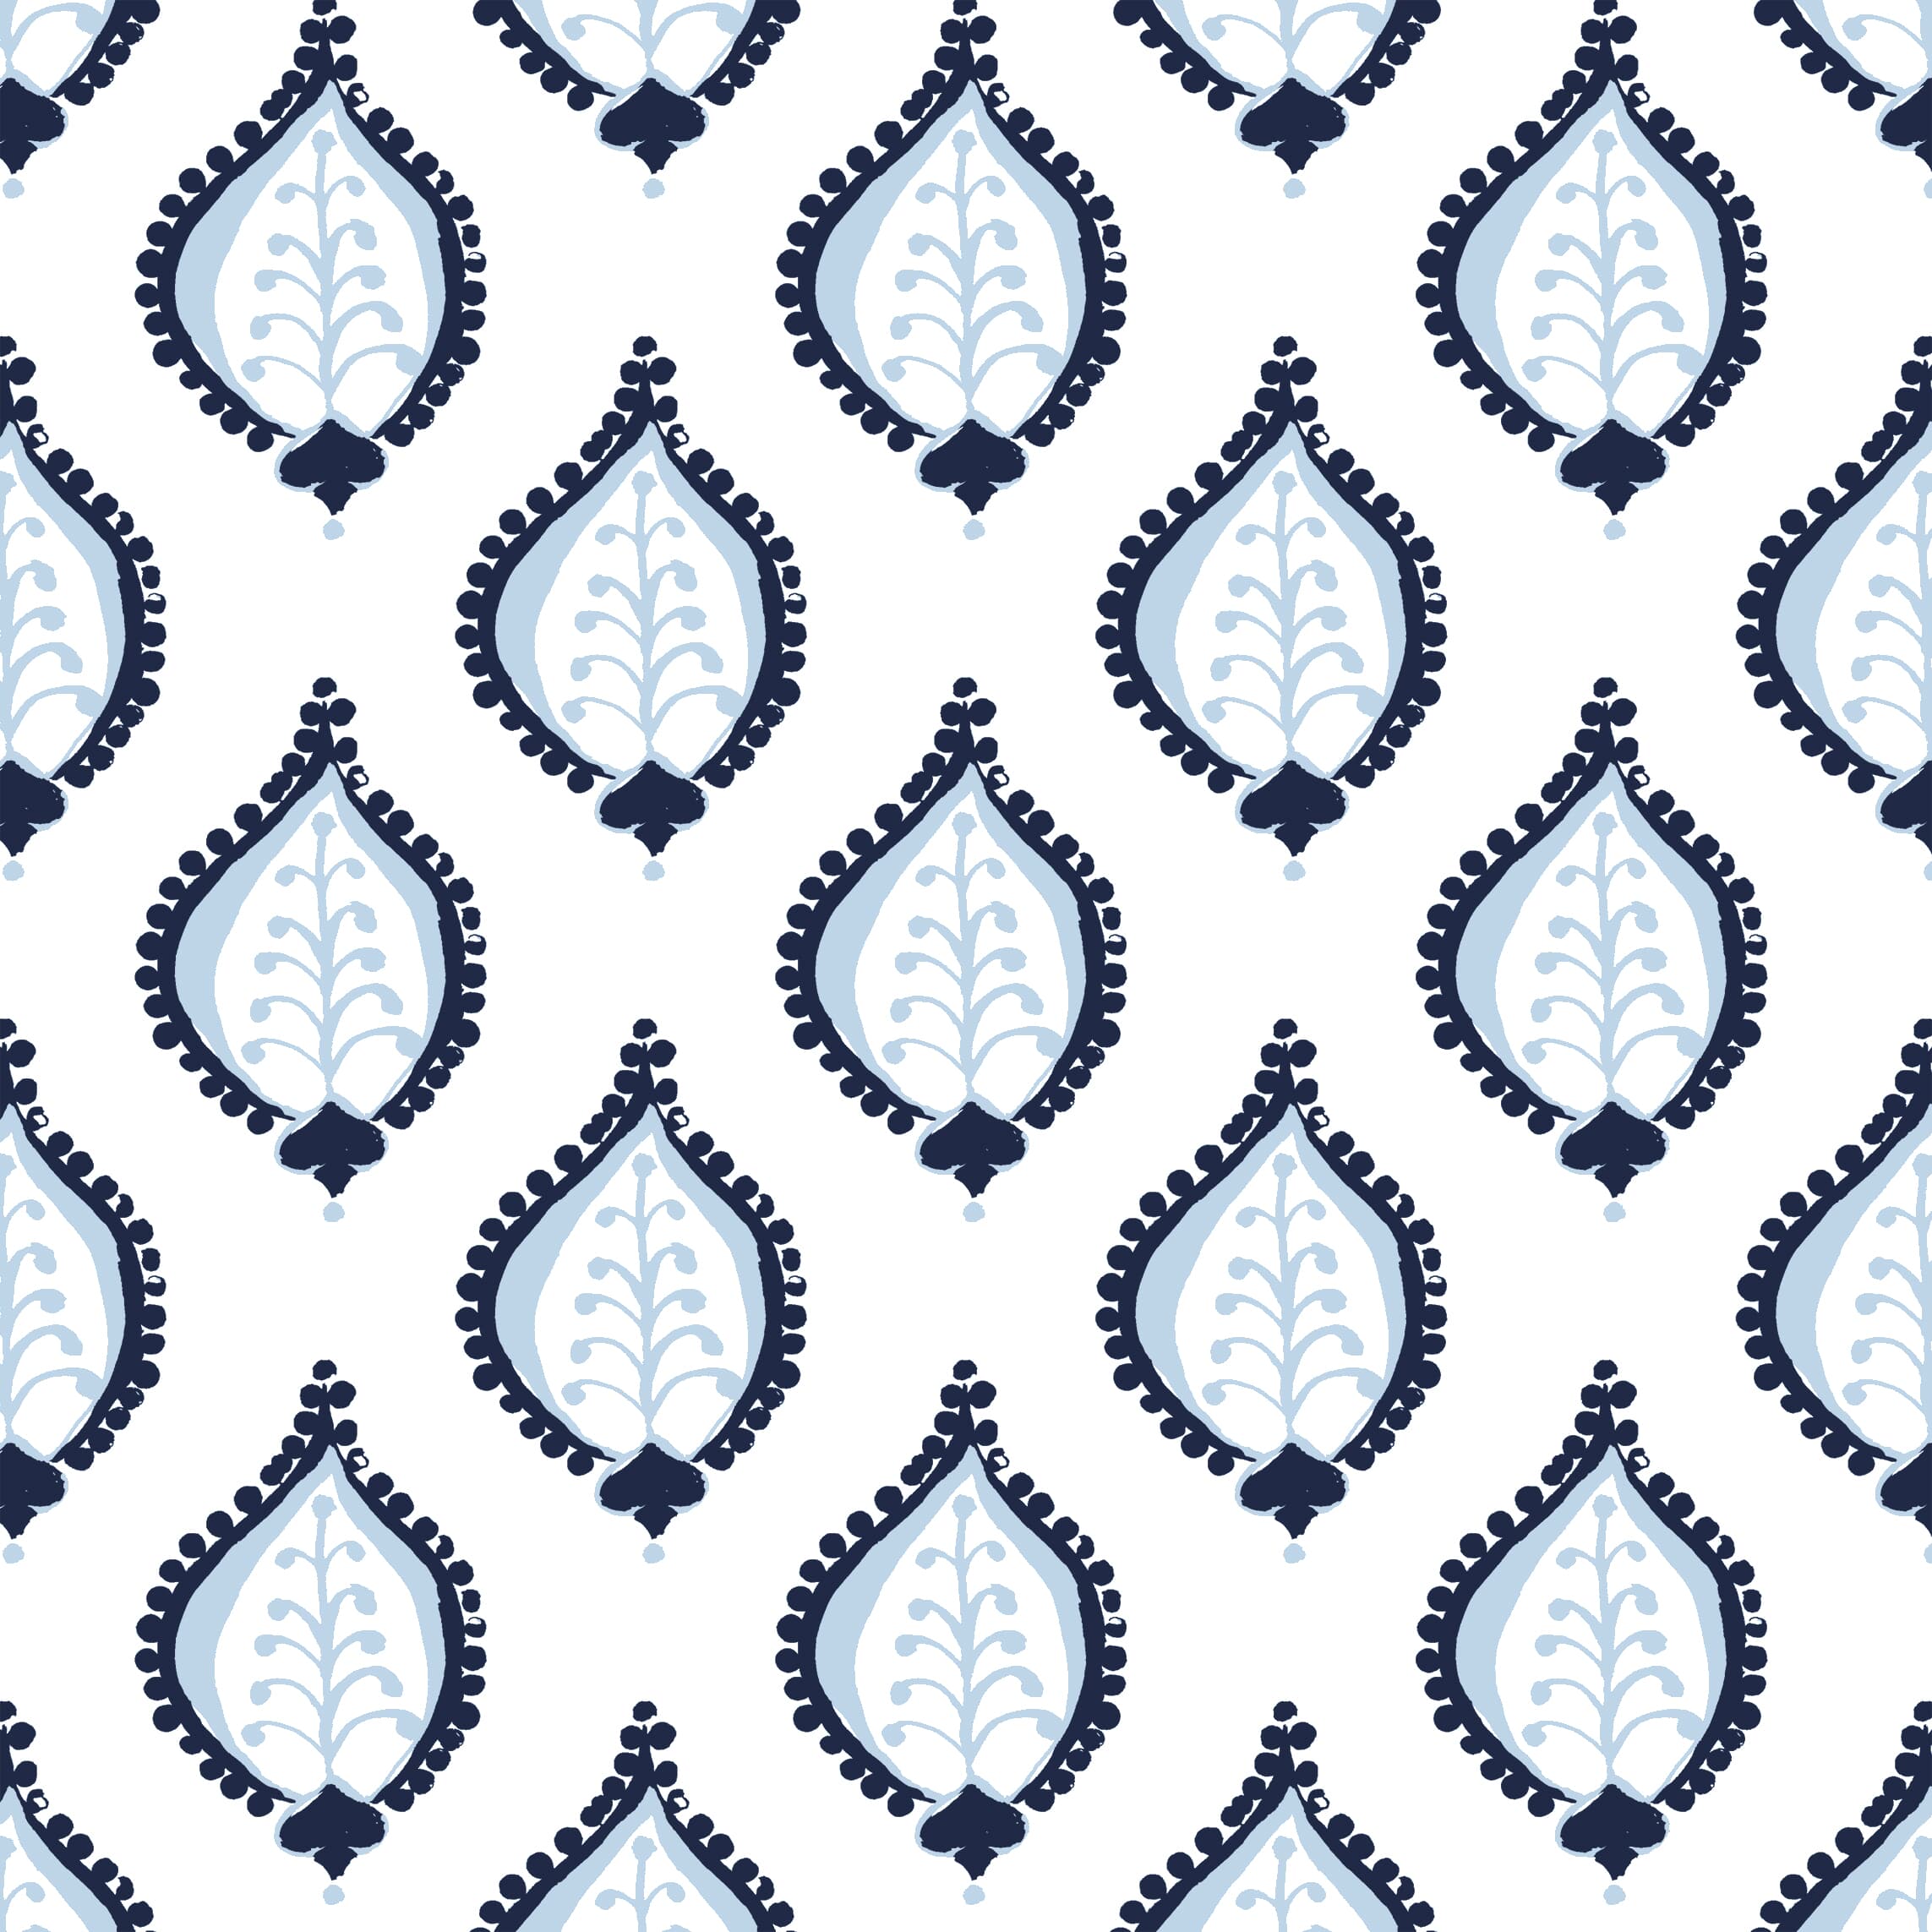 W04vl-1 Gentle Navy Wallpaper by Stout Fabric